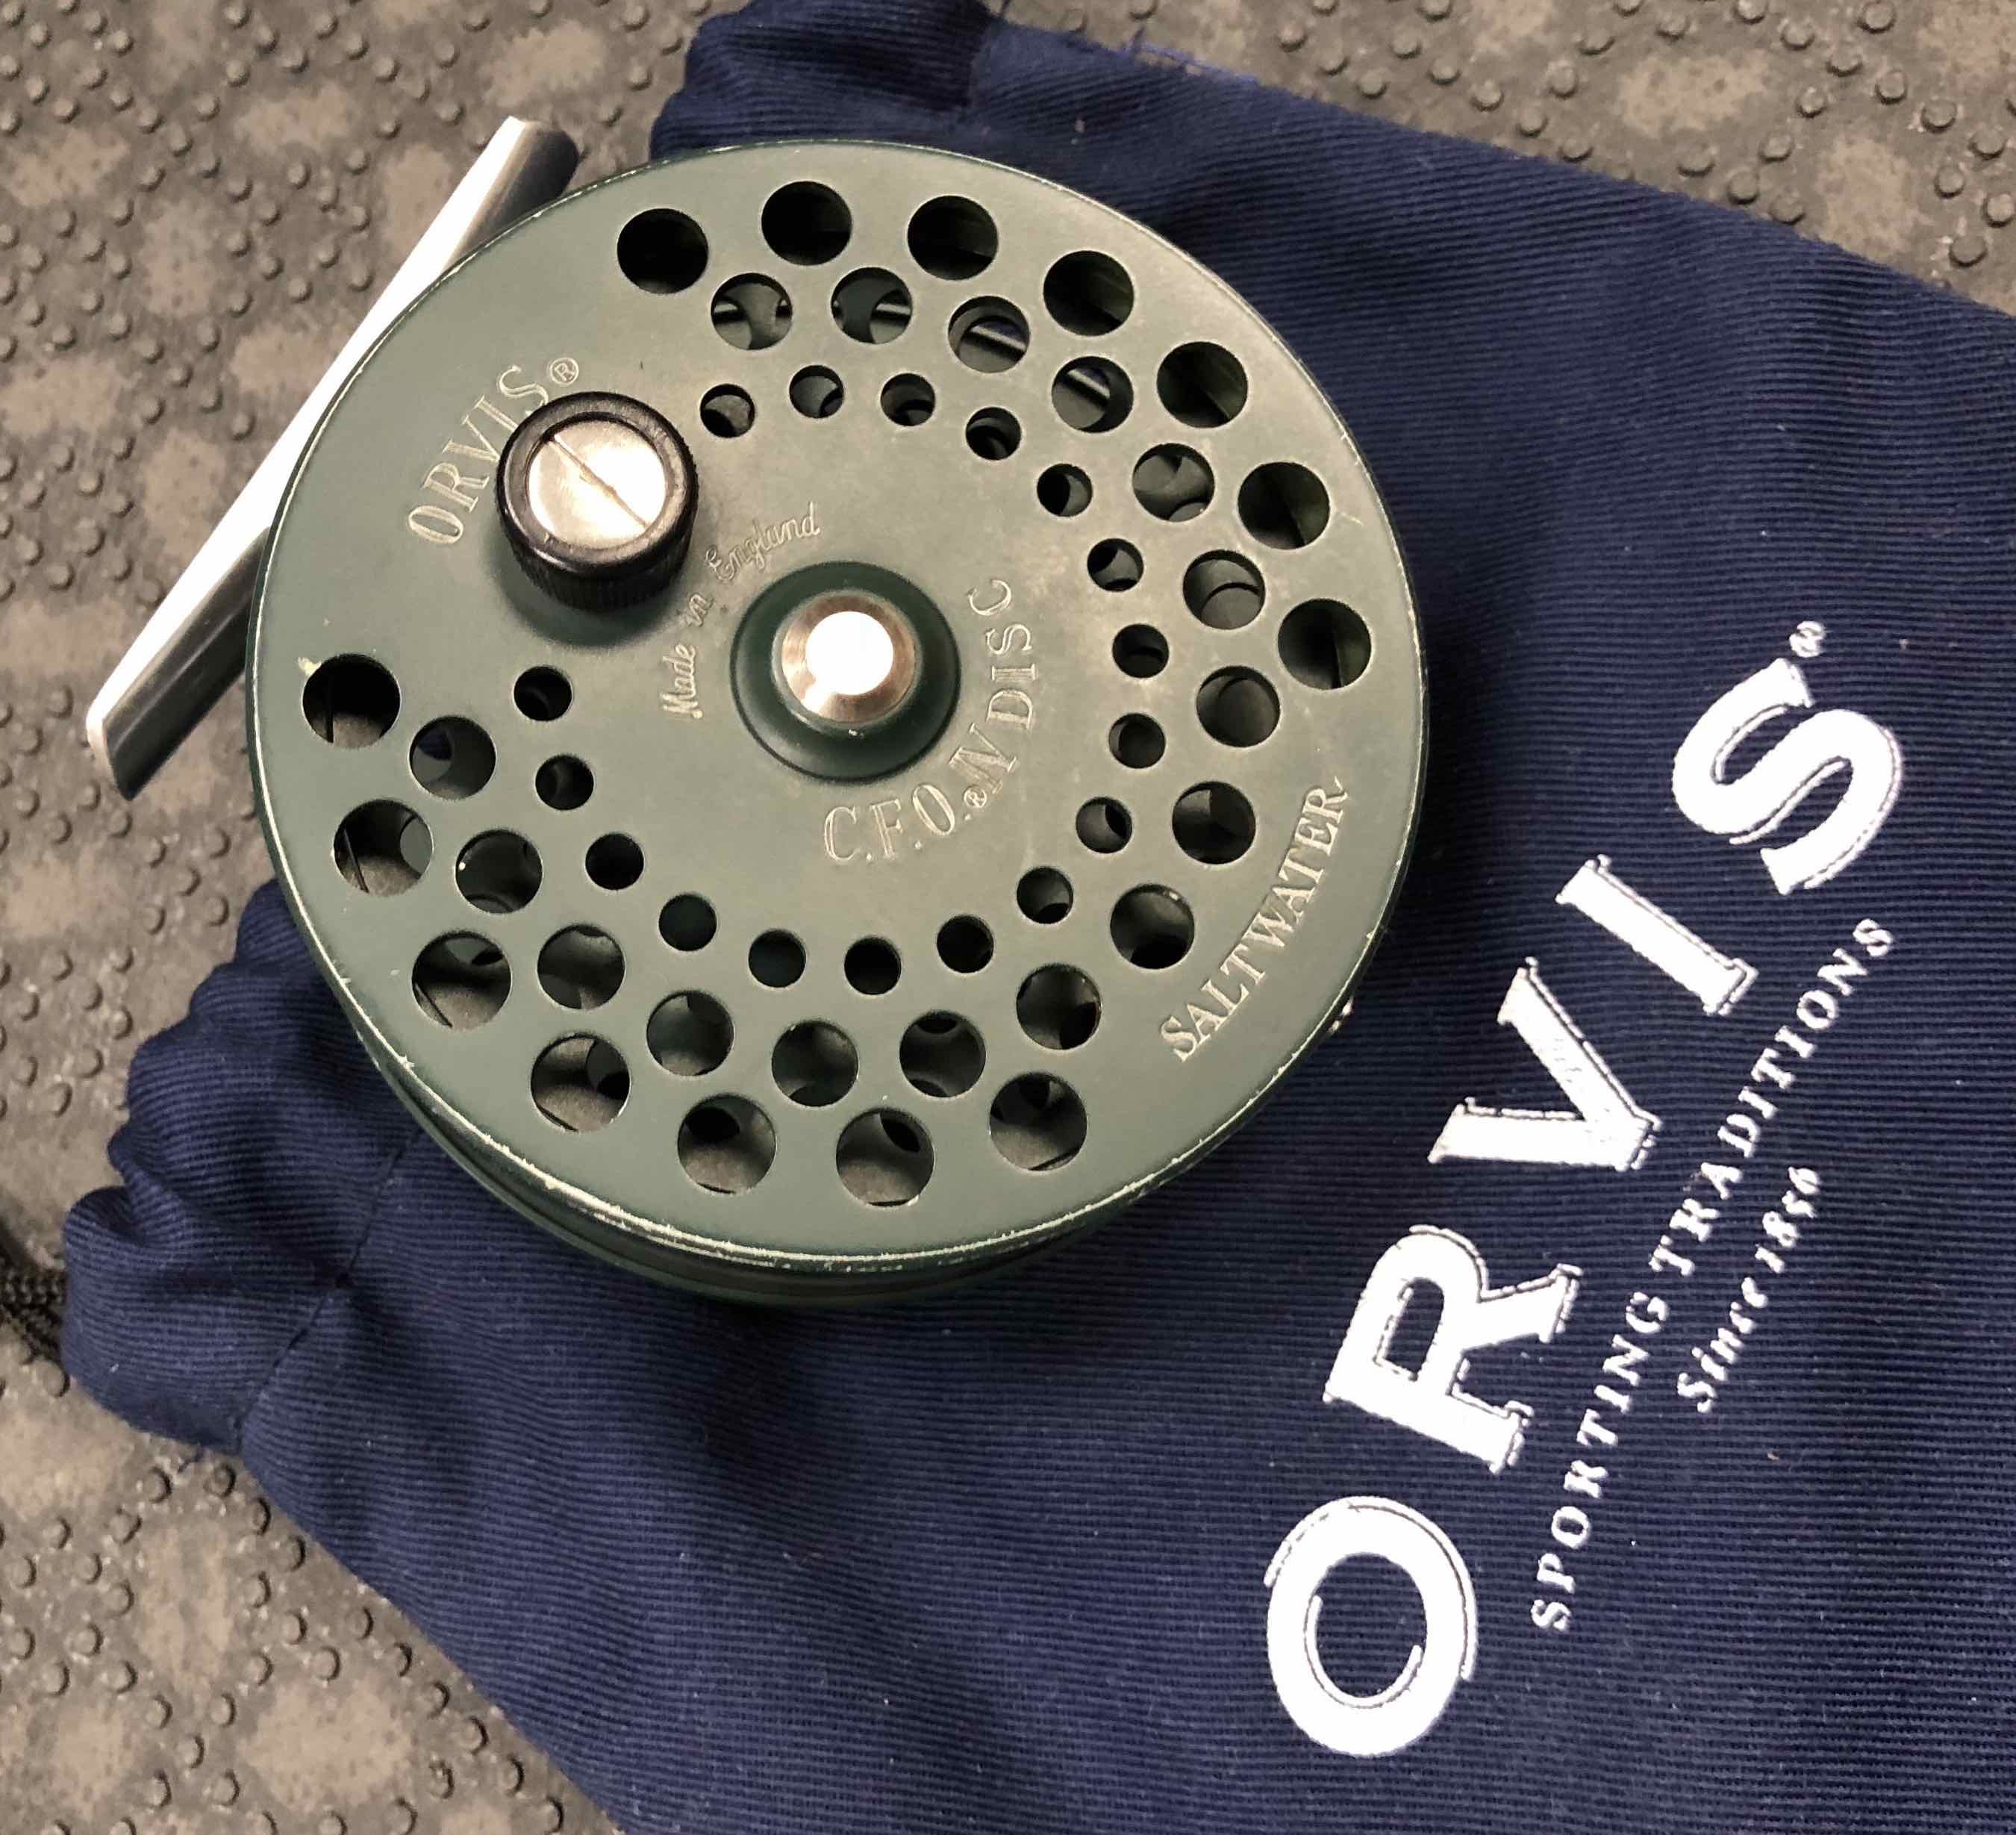 https://thefirstcast.ca/wp-content/uploads/2018/03/Orvis-CFO-IV-Disc-Saltwater-Made-in-England-AA.jpg